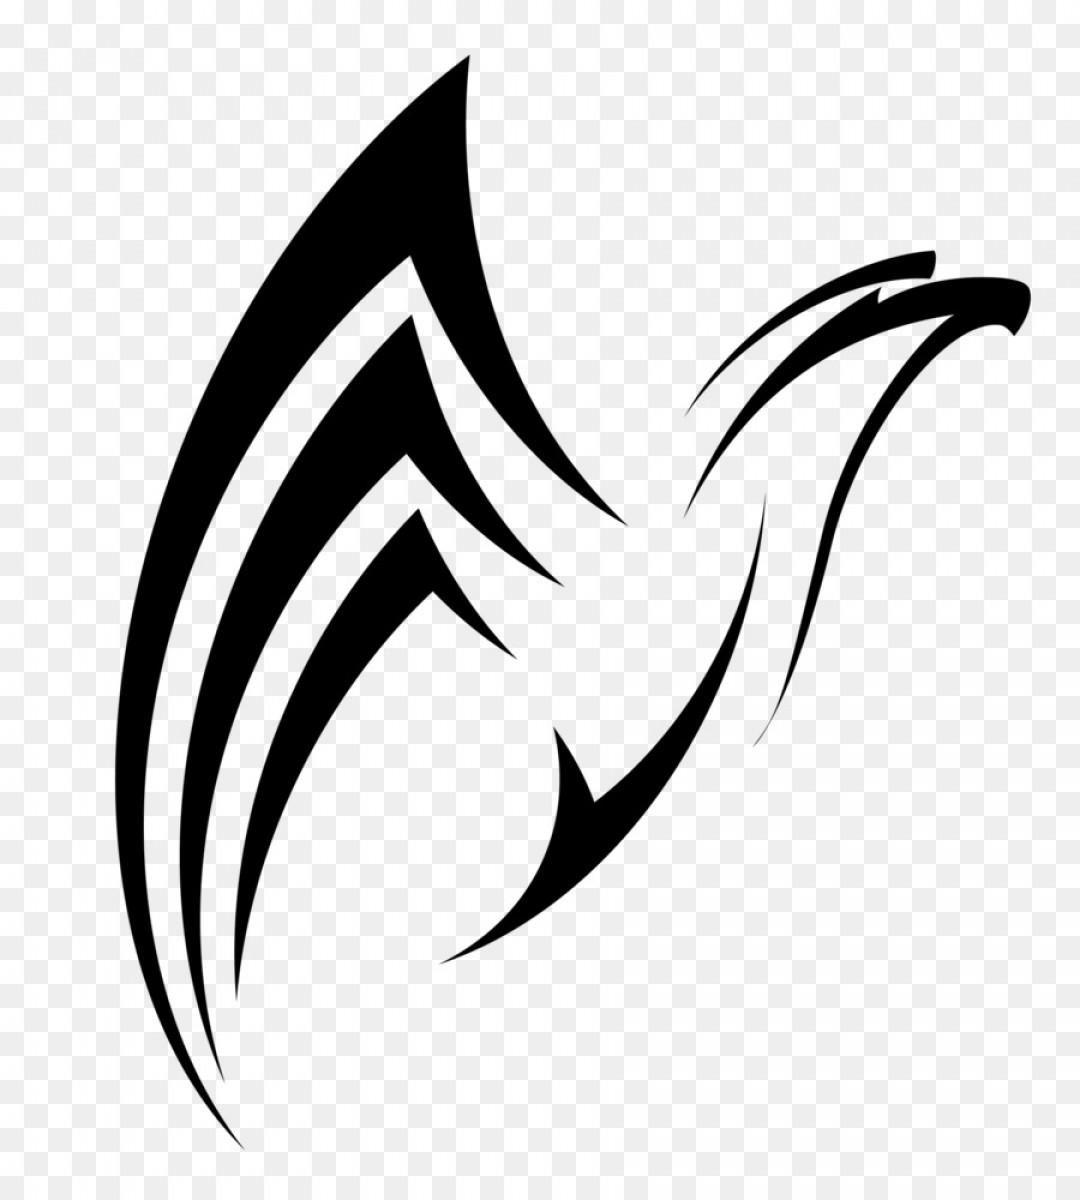 Black and White Seahawks Logo - Unique Black And White Seahawks Logo Vector Picture Free Vector